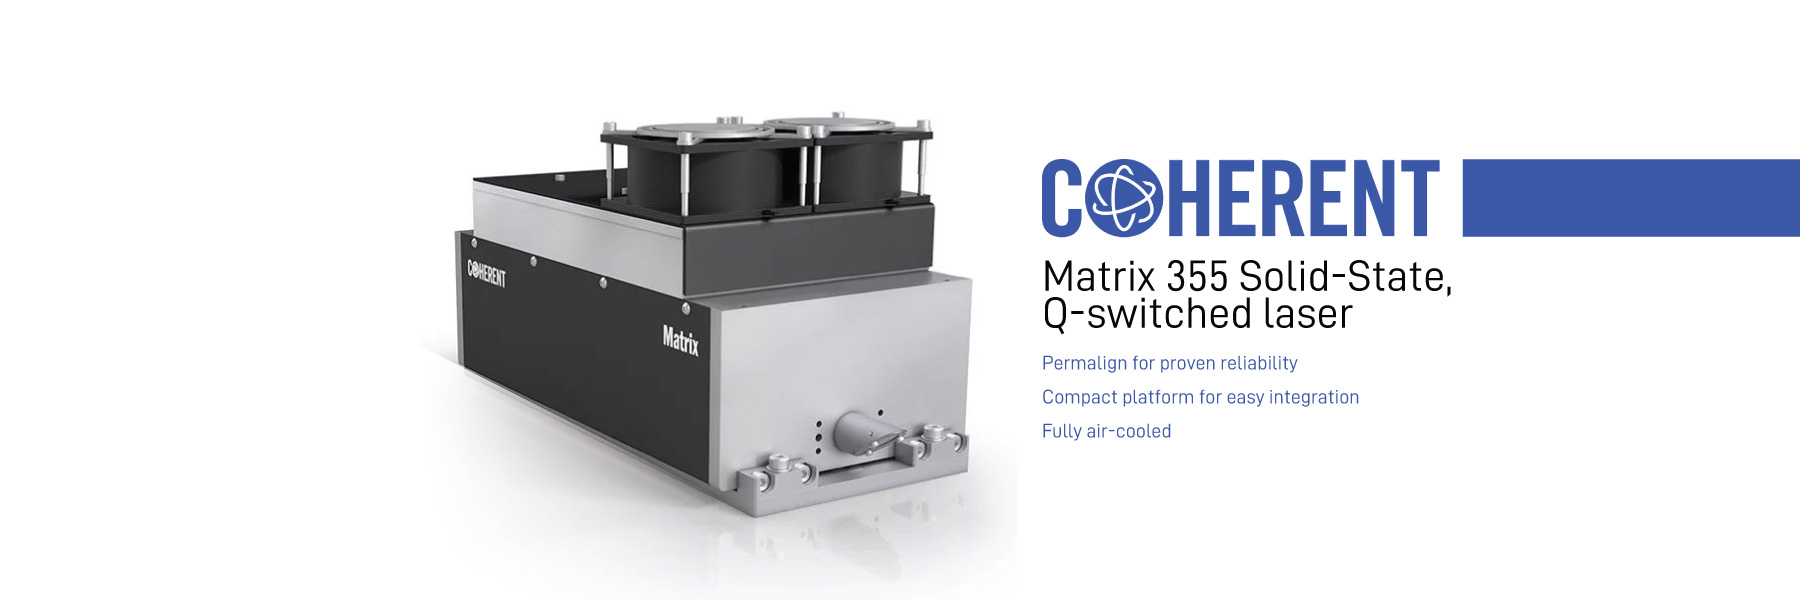 Matrix 355 Solid-State, Q-switched laser